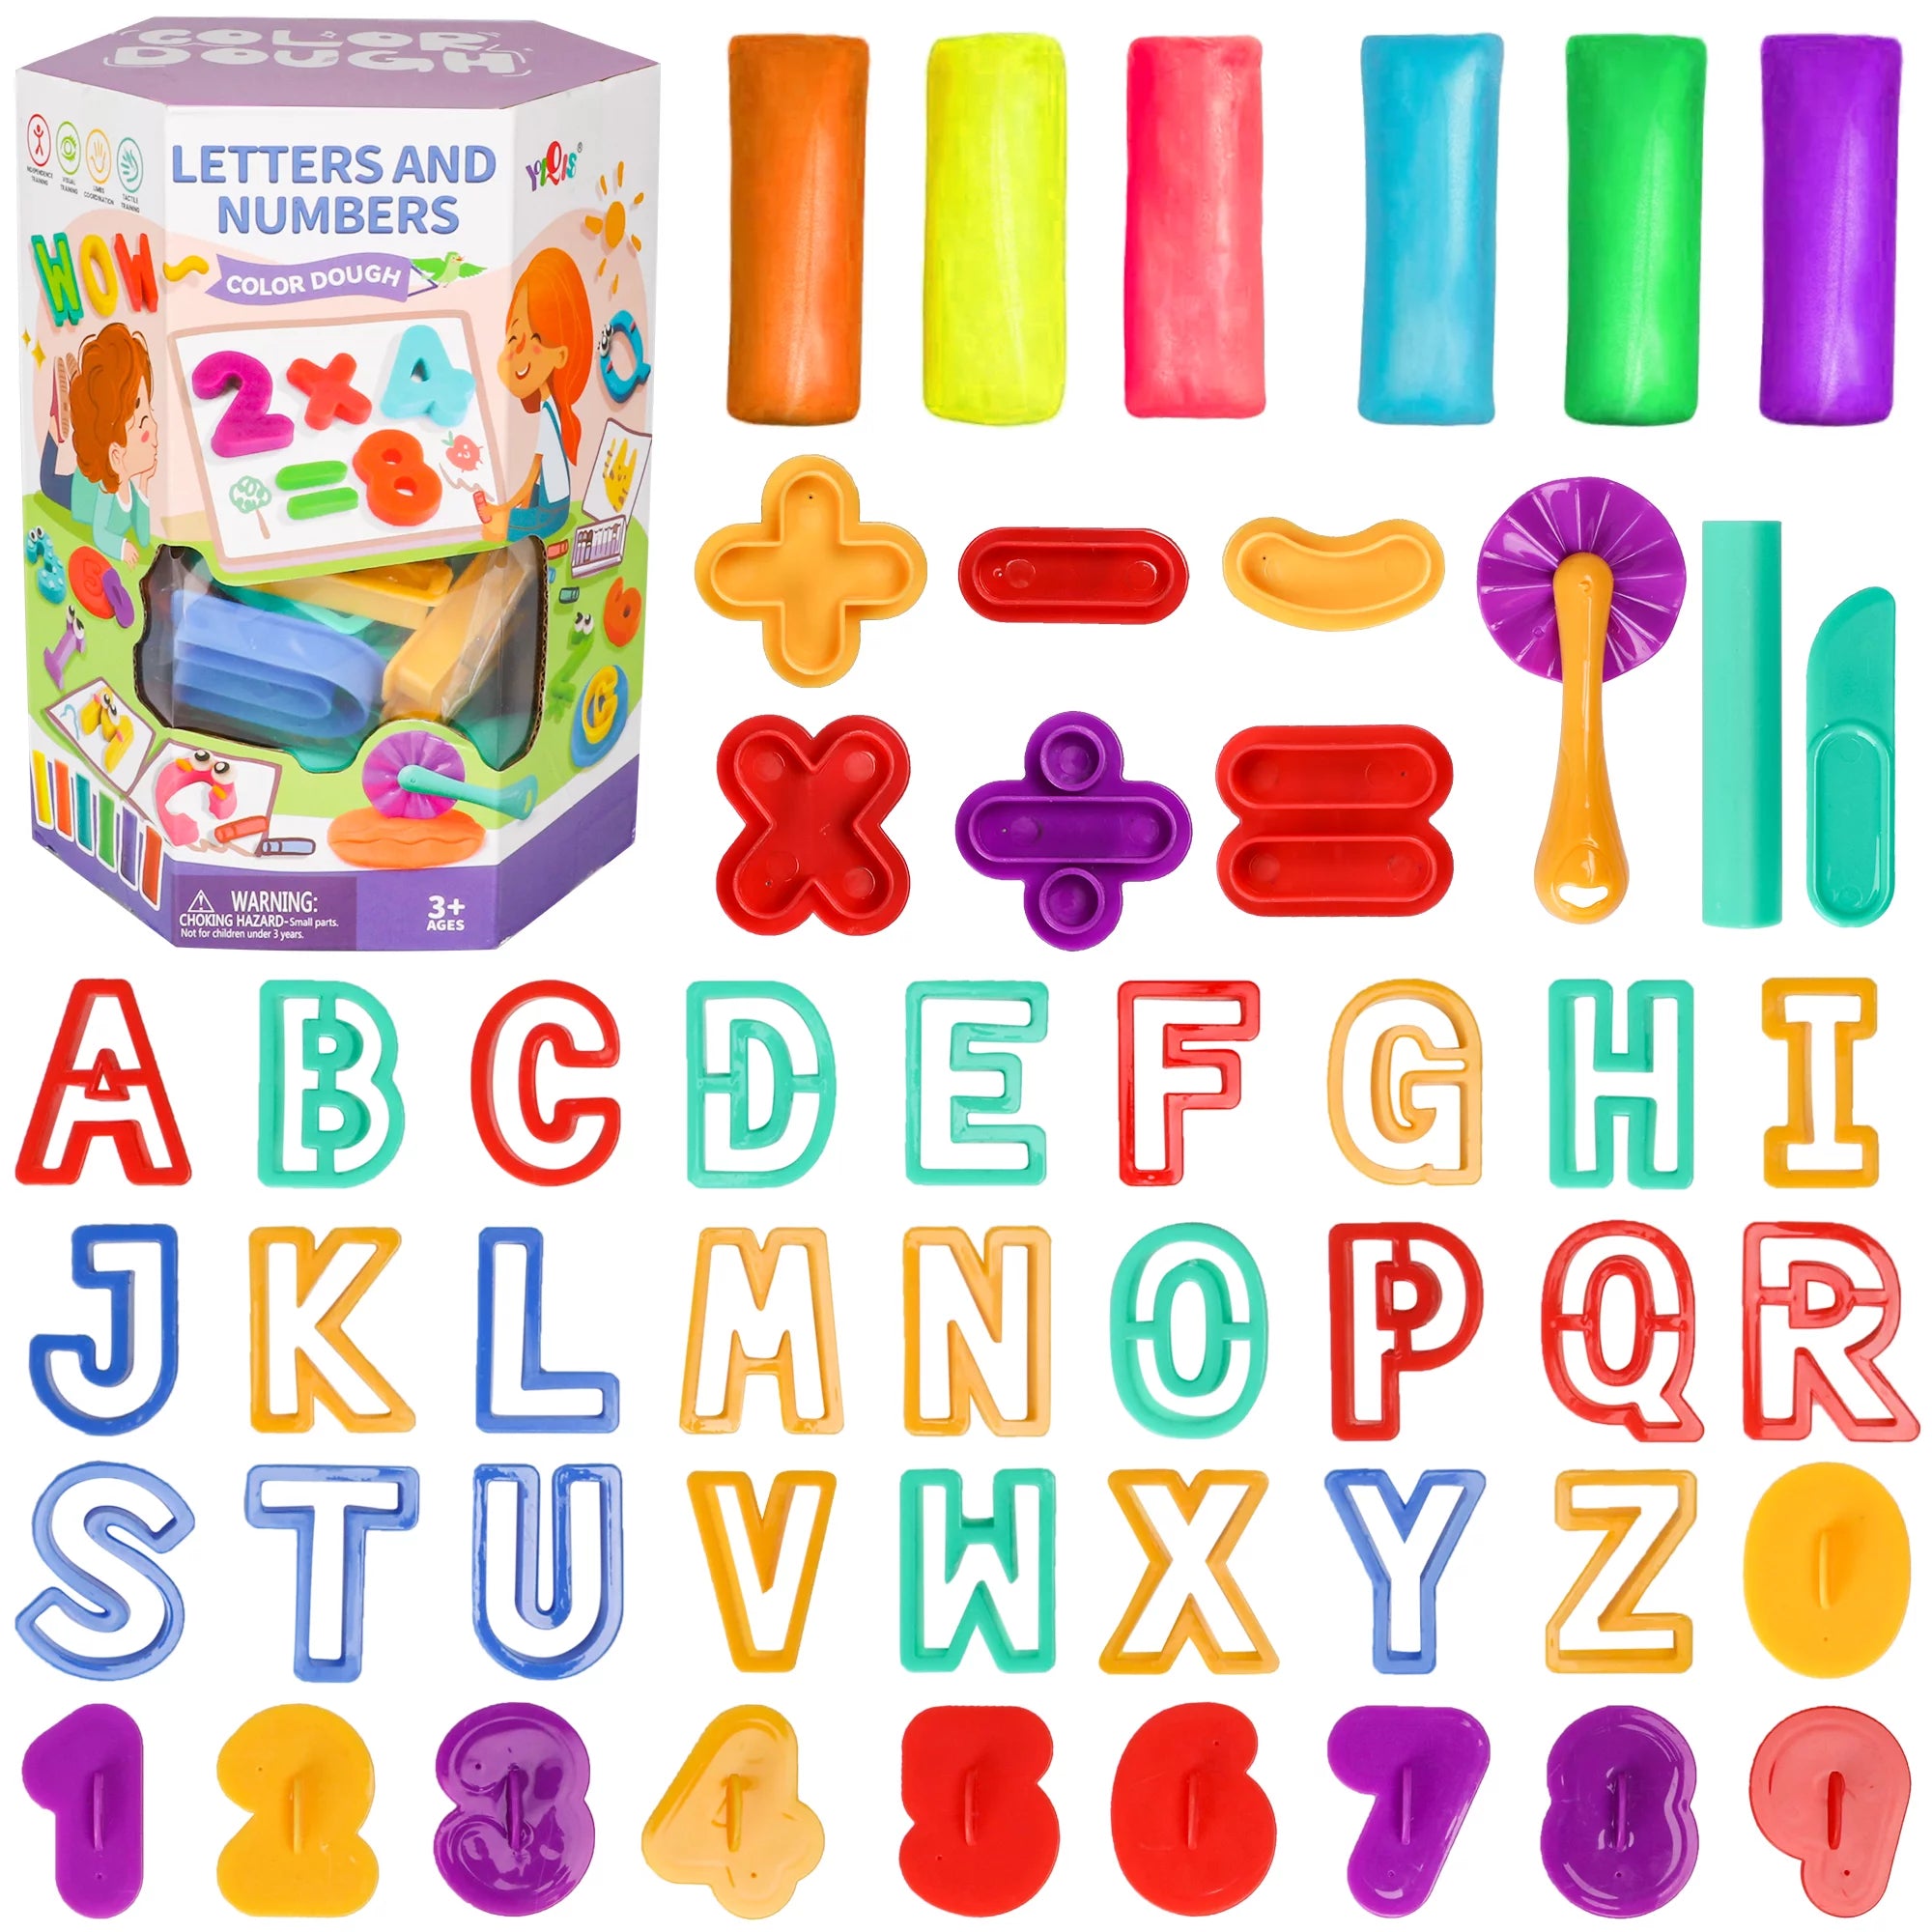 Hot Bee 49 Pcs Letters and Numbers Play Dough Set for Toddlers, Educational Learning Toys, Color Dough Art Toy Set